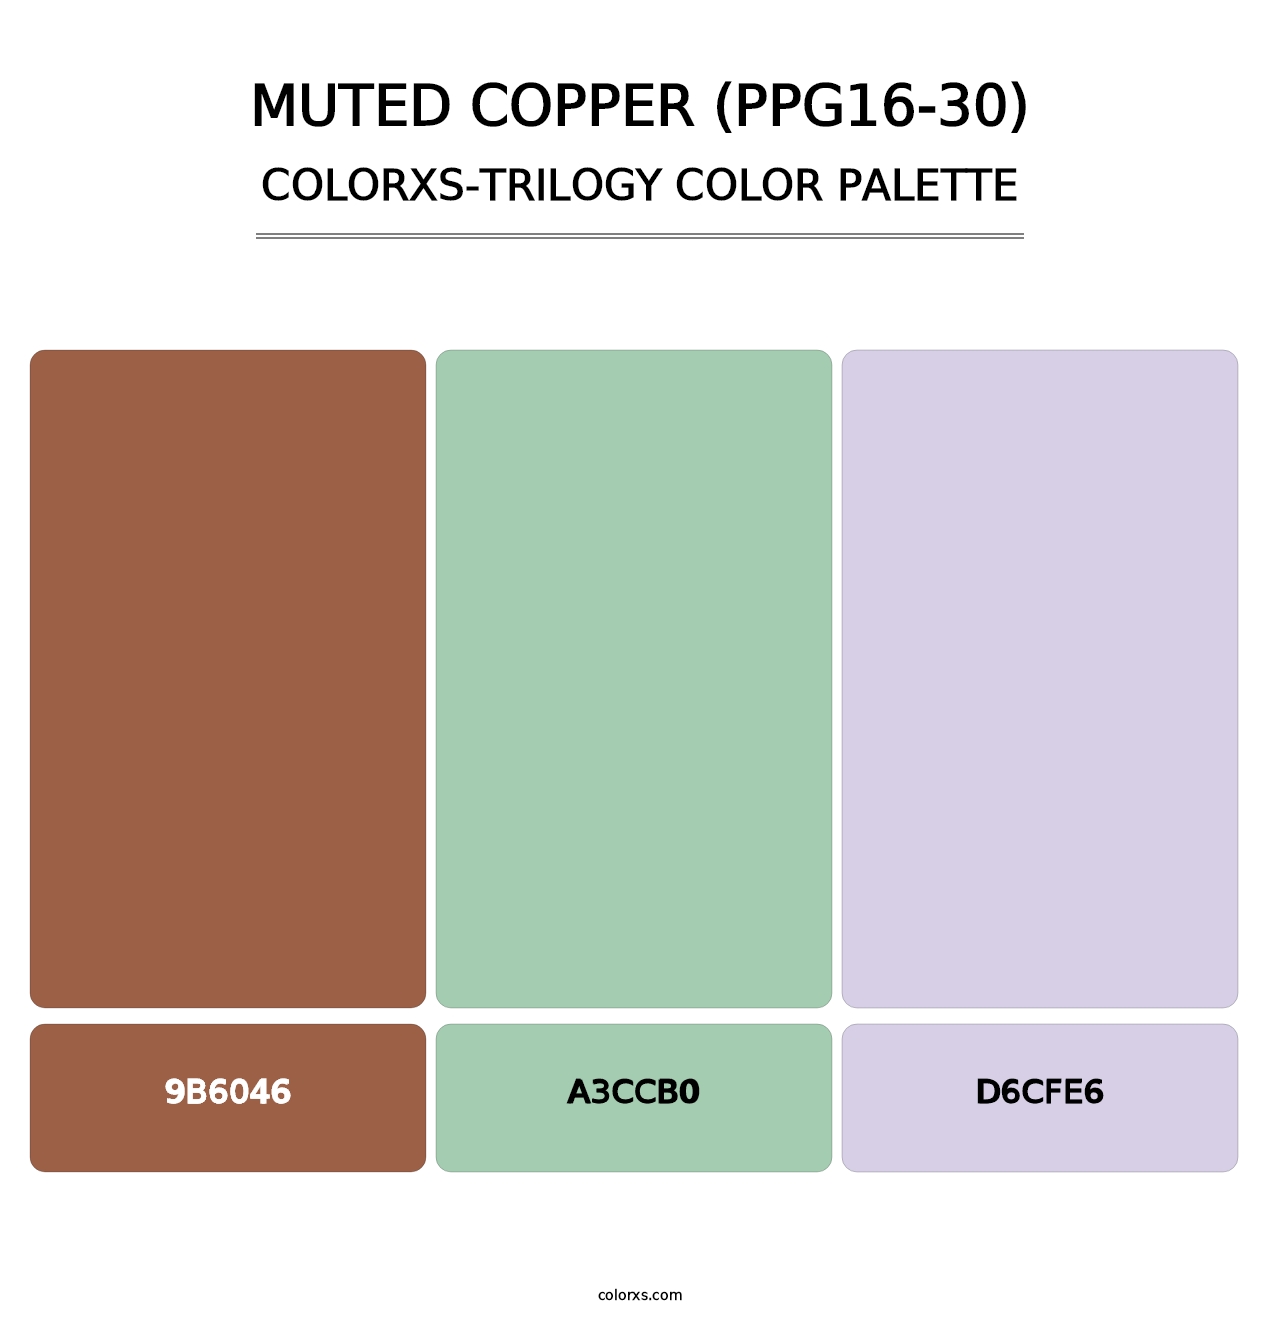 Muted Copper (PPG16-30) - Colorxs Trilogy Palette